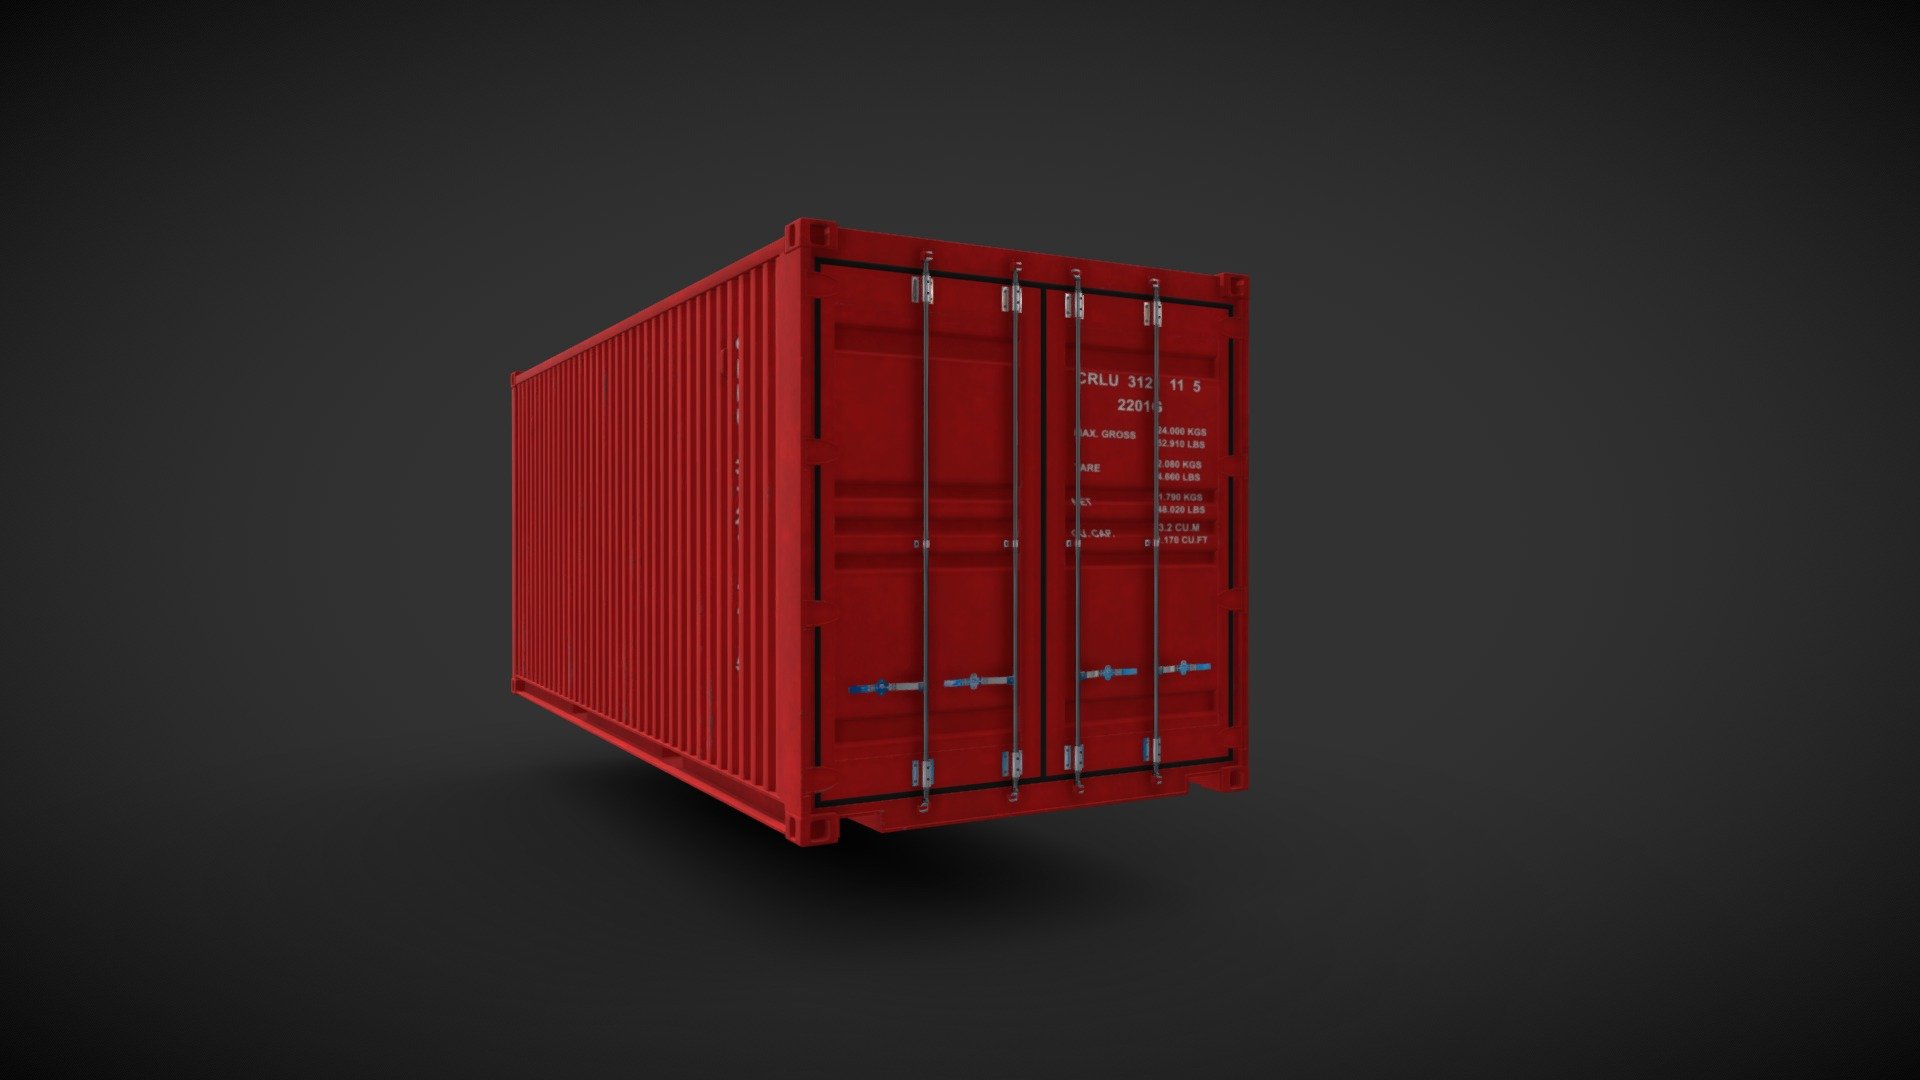 Hello everyone, everything good? Well, instead I bring you a container 20ft modeled with the highest quality, model super rich in details, with an incredible texture quality, to be as good as possible for you!

I hope you can enjoy it a lot!

YouTube channel https://www.youtube.com/channel/UC9rRo6Q8s8xuCCvE1AcFPDQ - Shipping Container 20FT - 3D model by Renato3DM 3d model